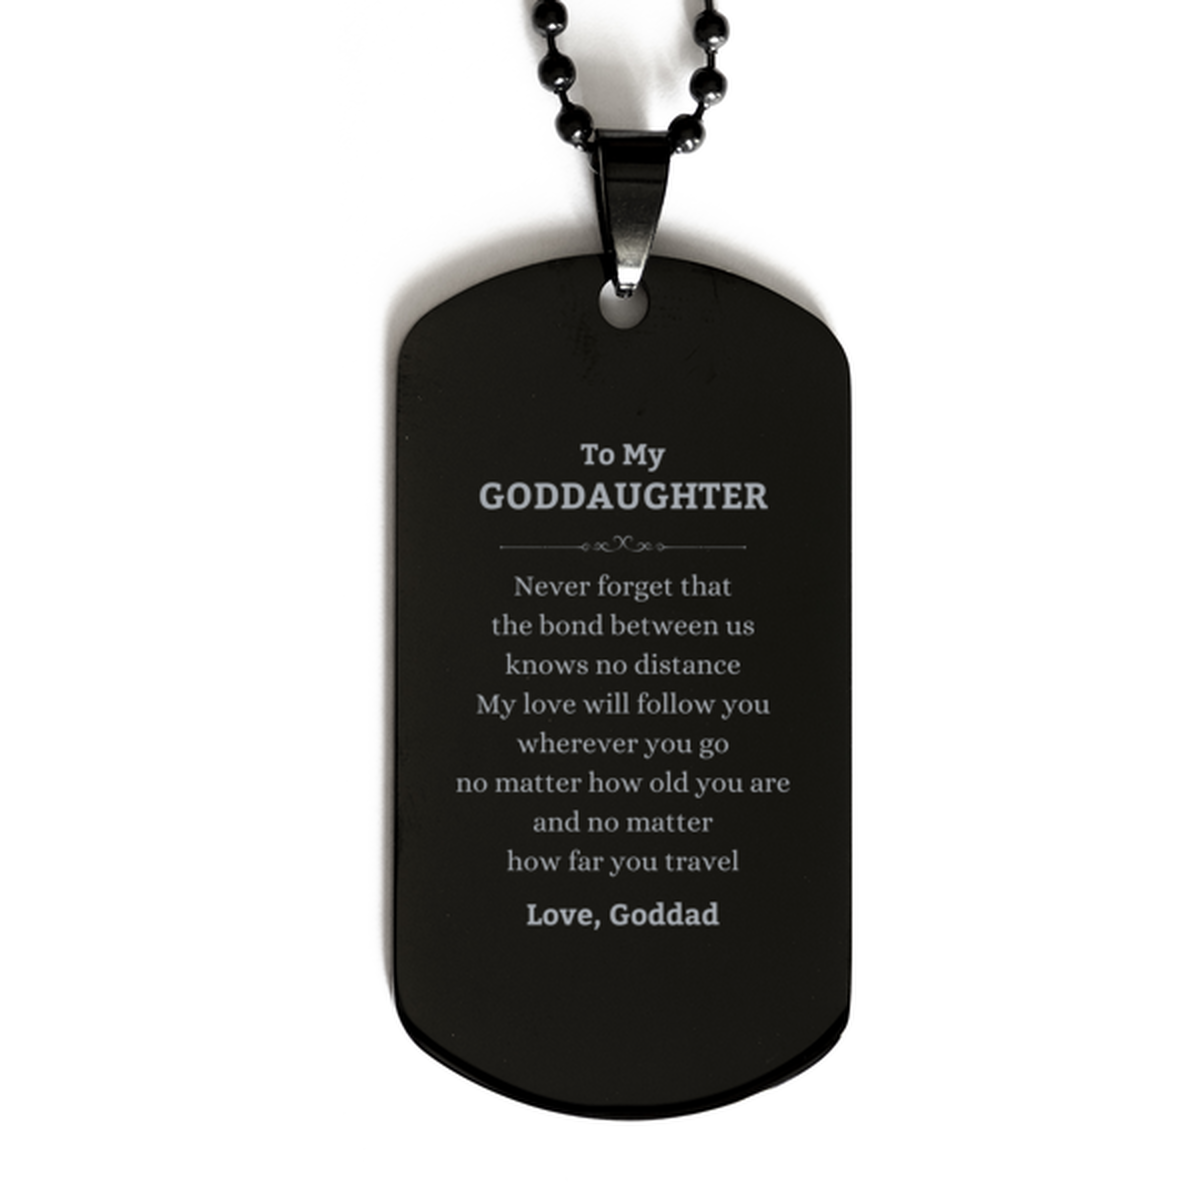 Goddaughter Birthday Gifts from Goddad, Adjustable Black Dog Tag for Goddaughter Christmas Graduation Unique Gifts Goddaughter Never forget that the bond between us knows no distance. Love, Goddad